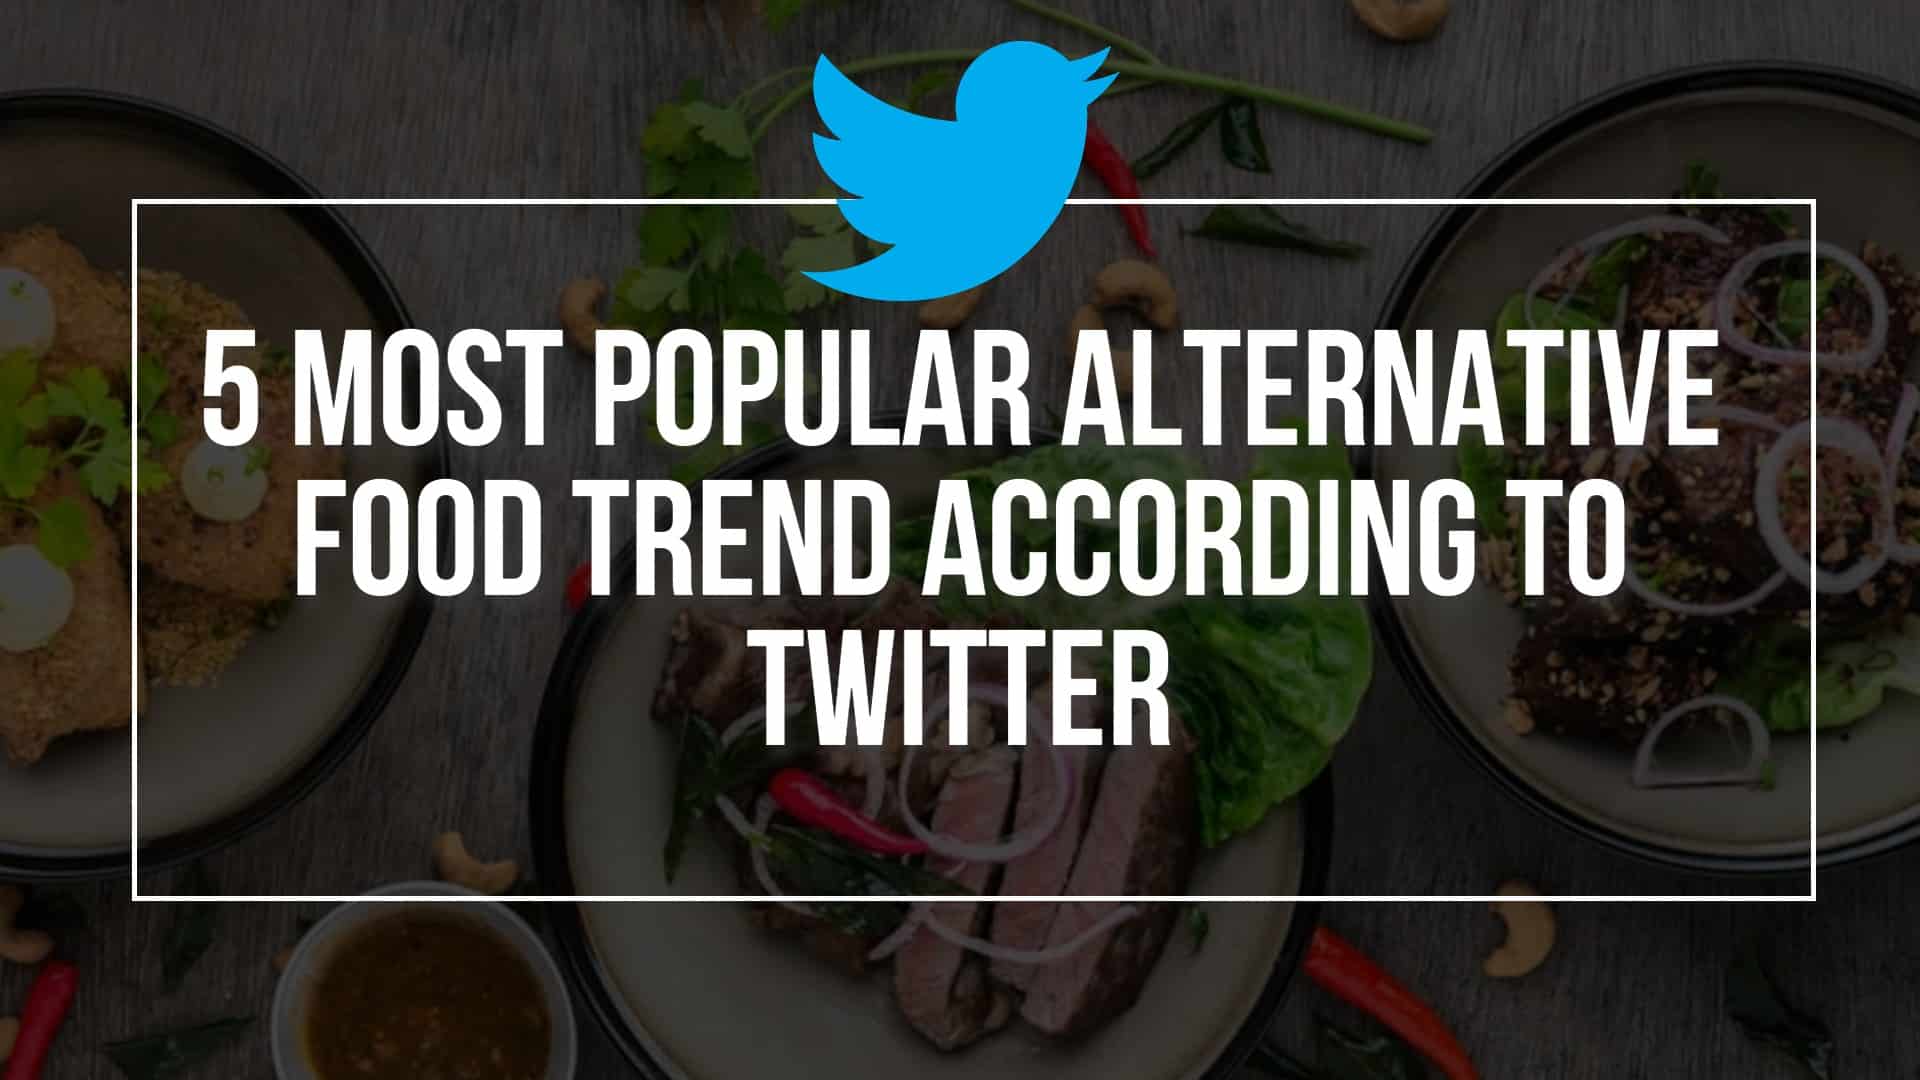 5 Most Popular Alternative Food Trends According to Twitter